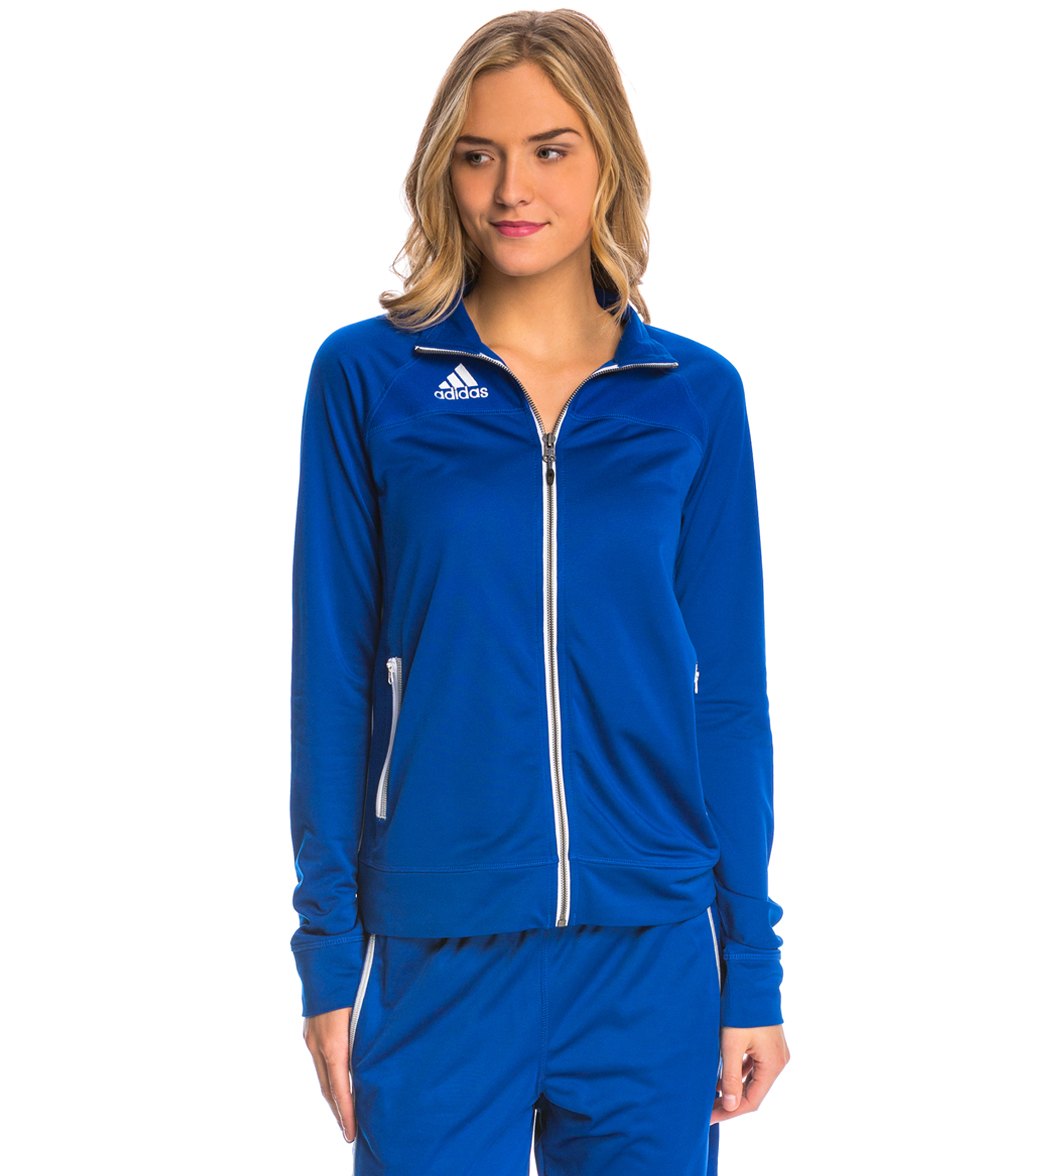 womens adidas warm up suits